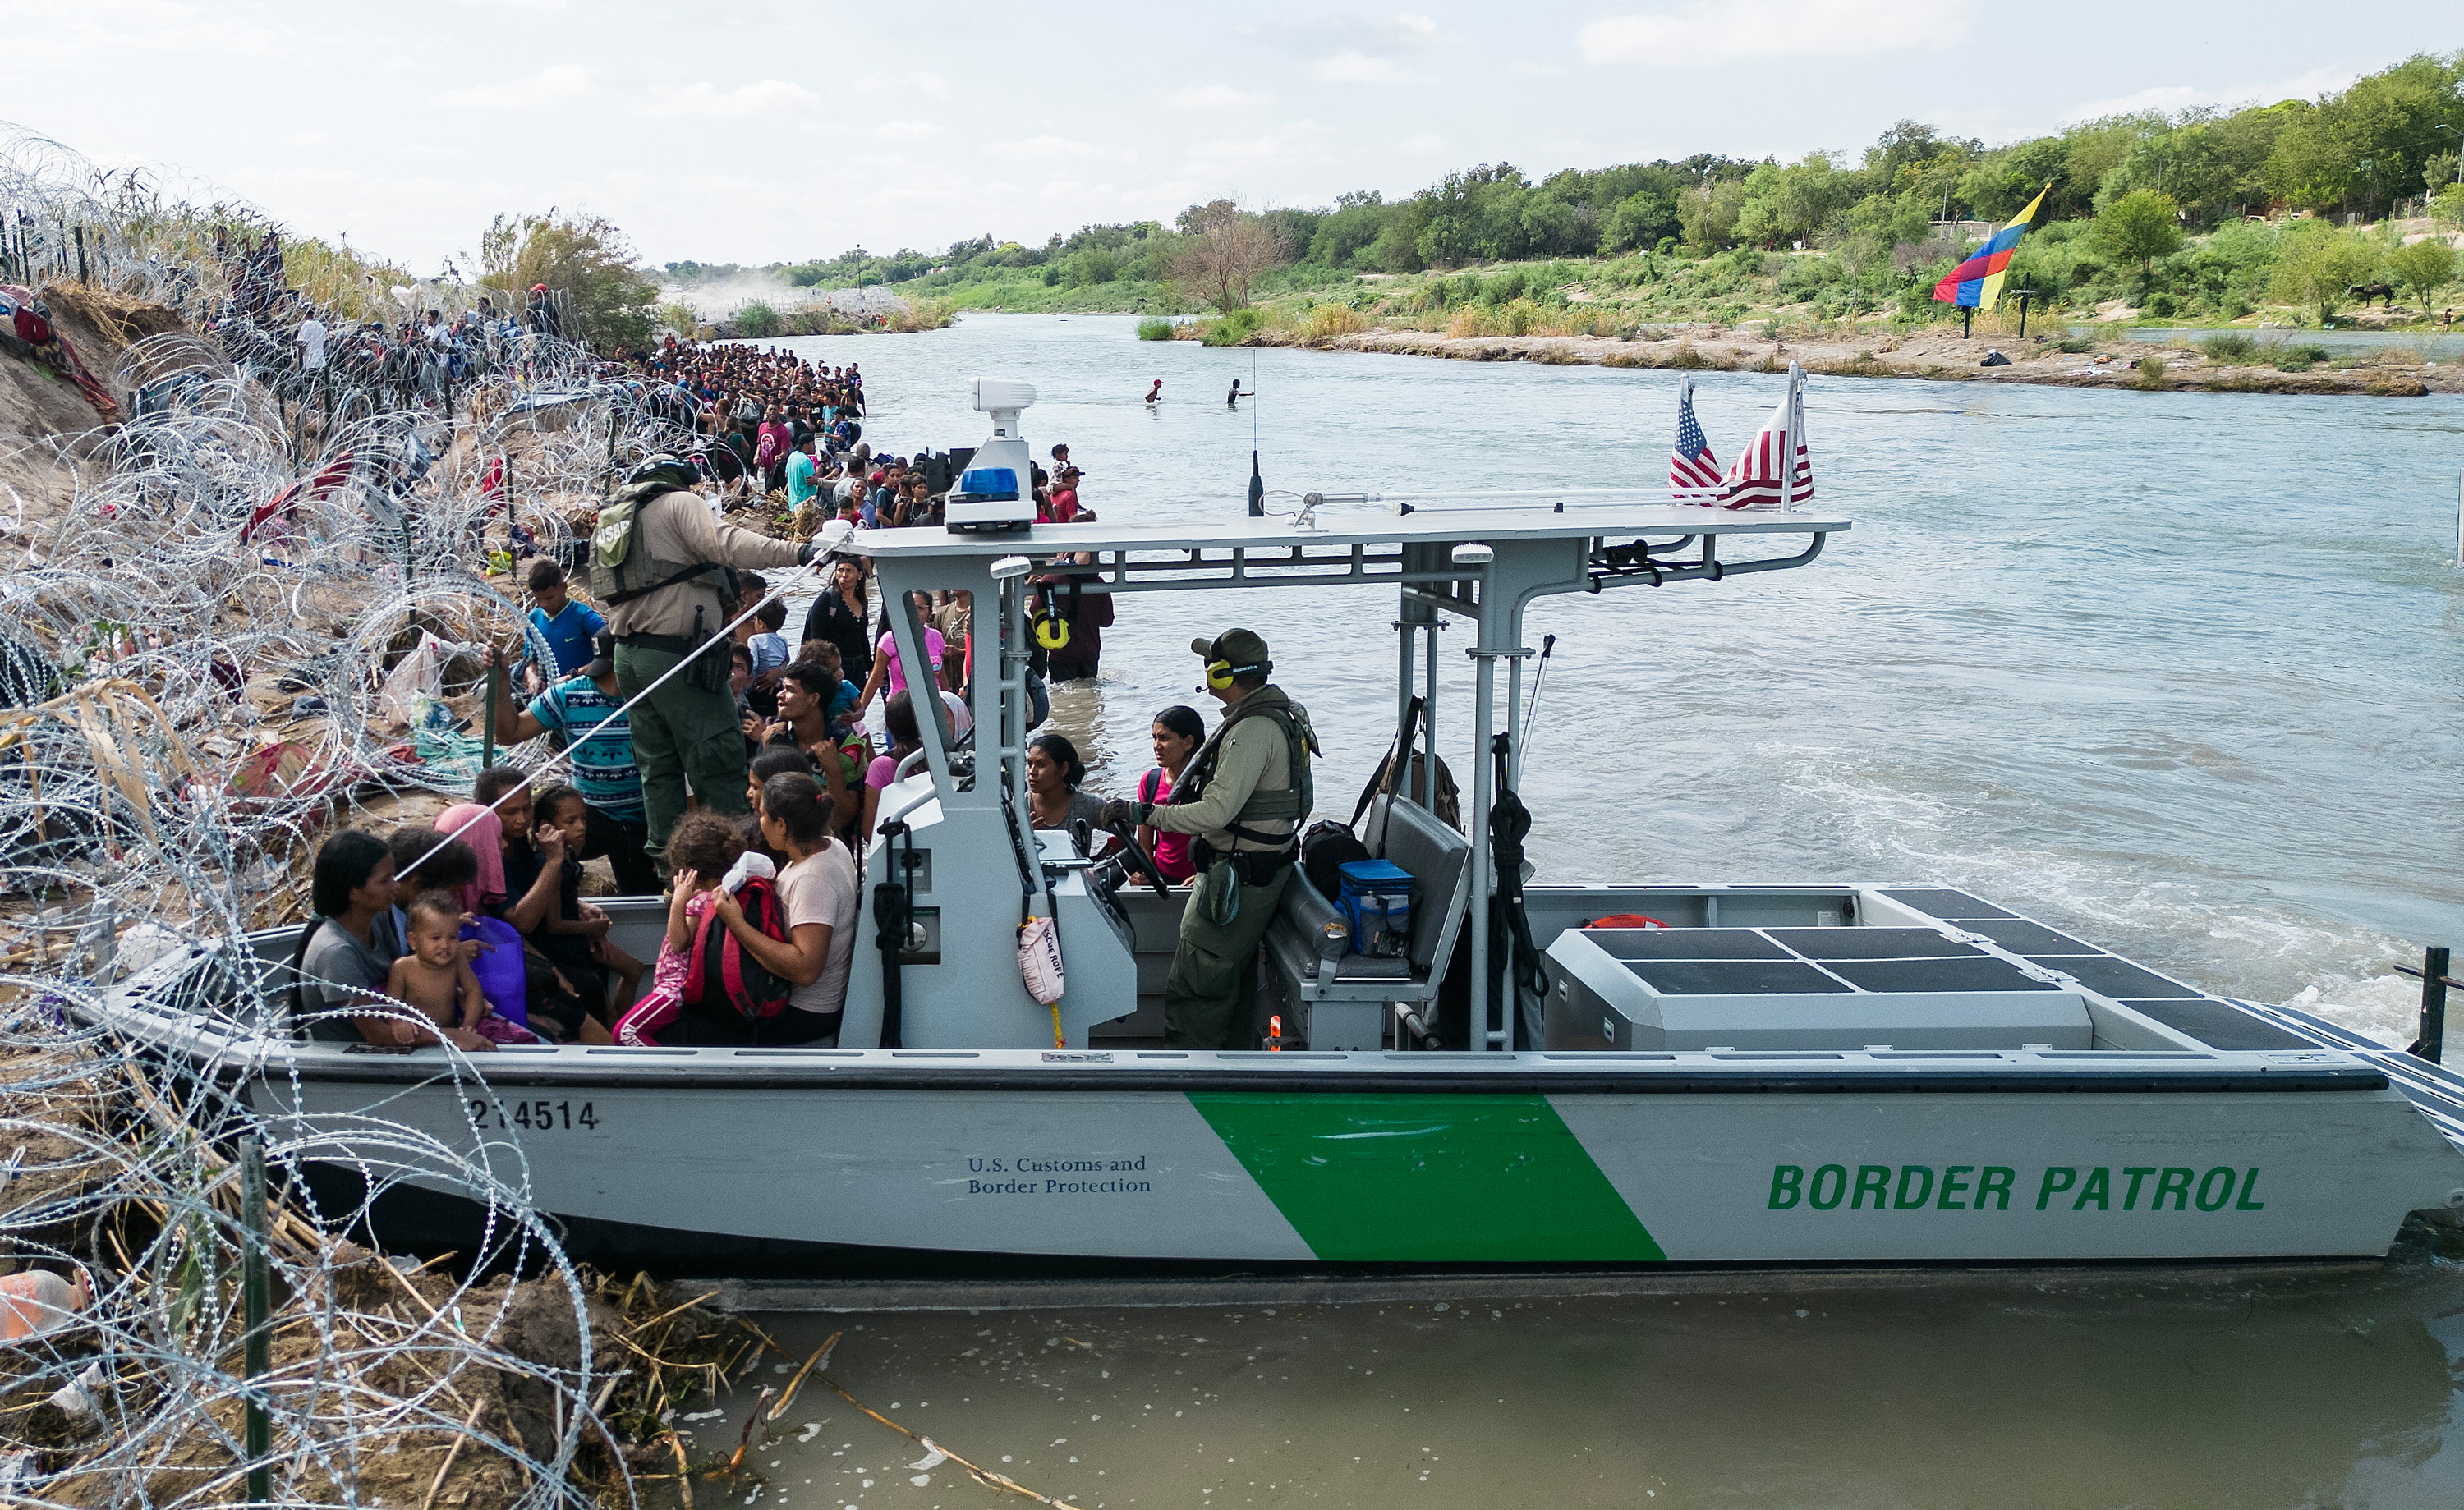 A US Border Patrol boat picks up families with young children as other migrants wait for an opening in the razor wire barrier to cross into the United States, in Eagle Pass, Texas, on September 25.